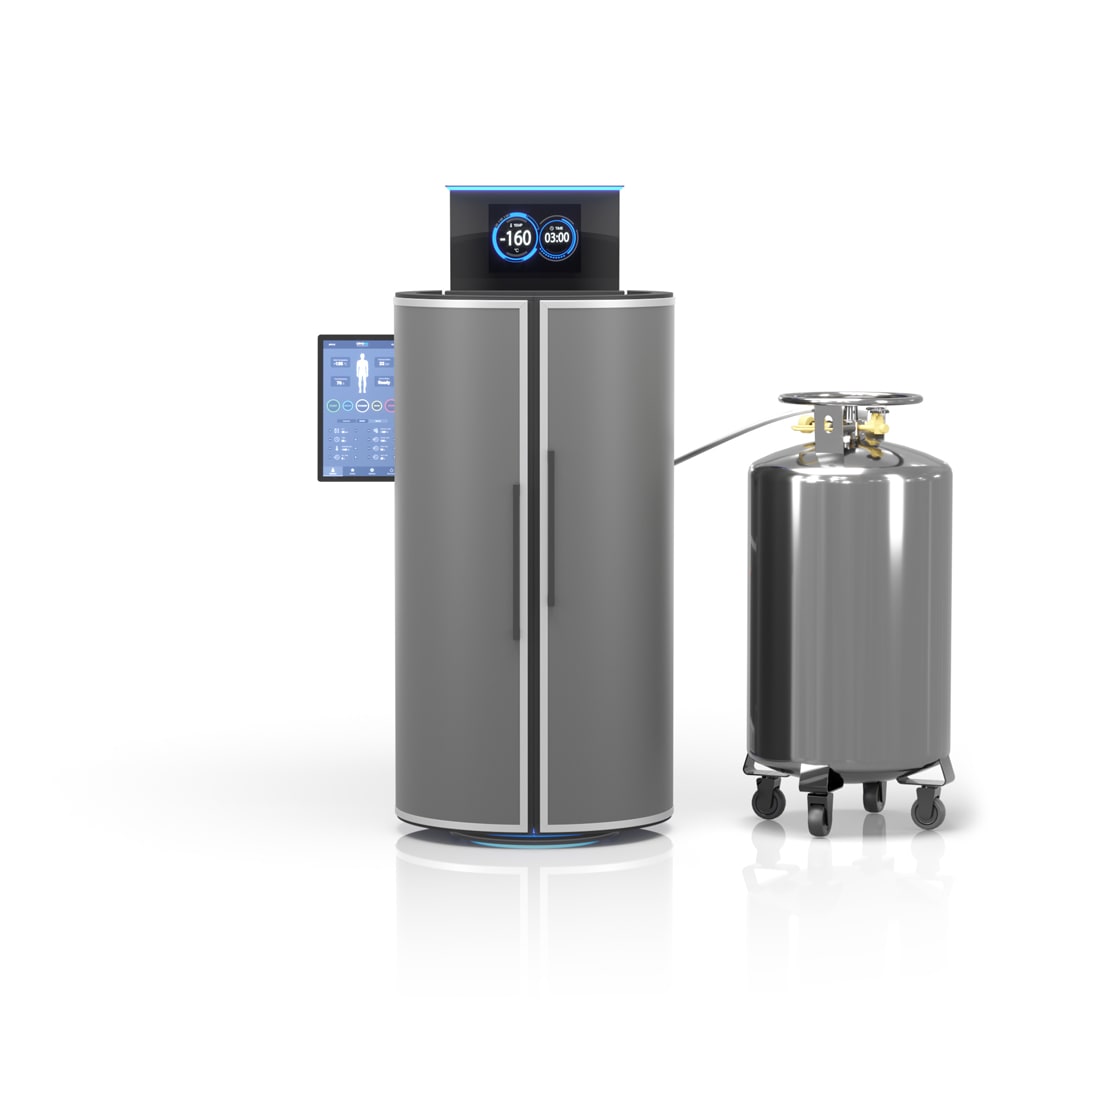 Cryotherapy machine with pressurized tank vessel